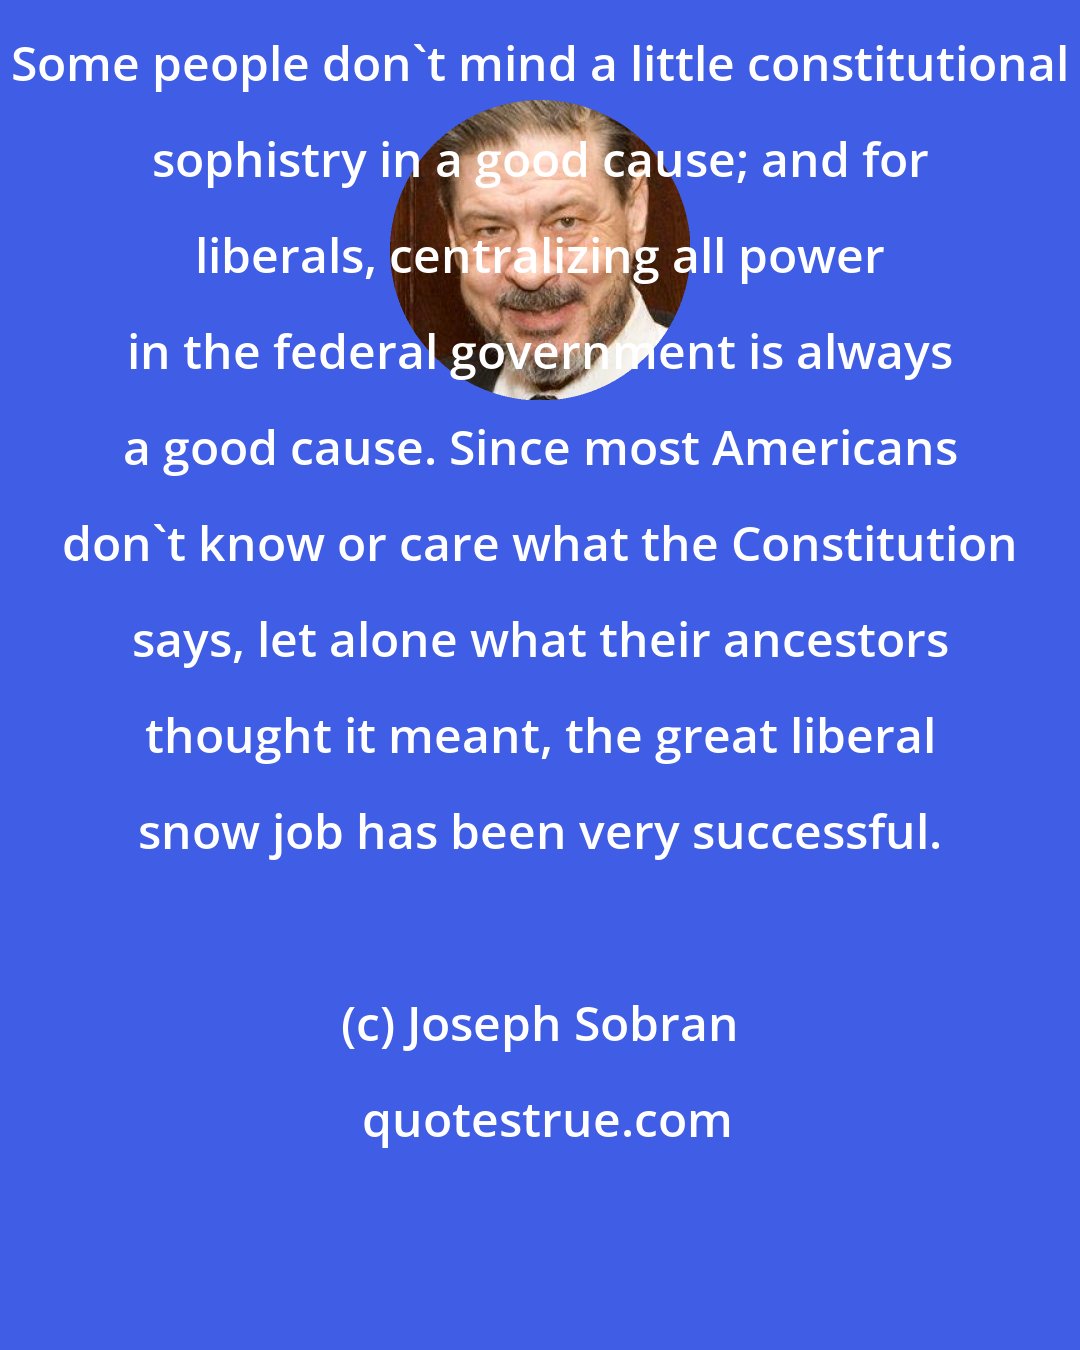 Joseph Sobran: Some people don't mind a little constitutional sophistry in a good cause; and for liberals, centralizing all power in the federal government is always a good cause. Since most Americans don't know or care what the Constitution says, let alone what their ancestors thought it meant, the great liberal snow job has been very successful.